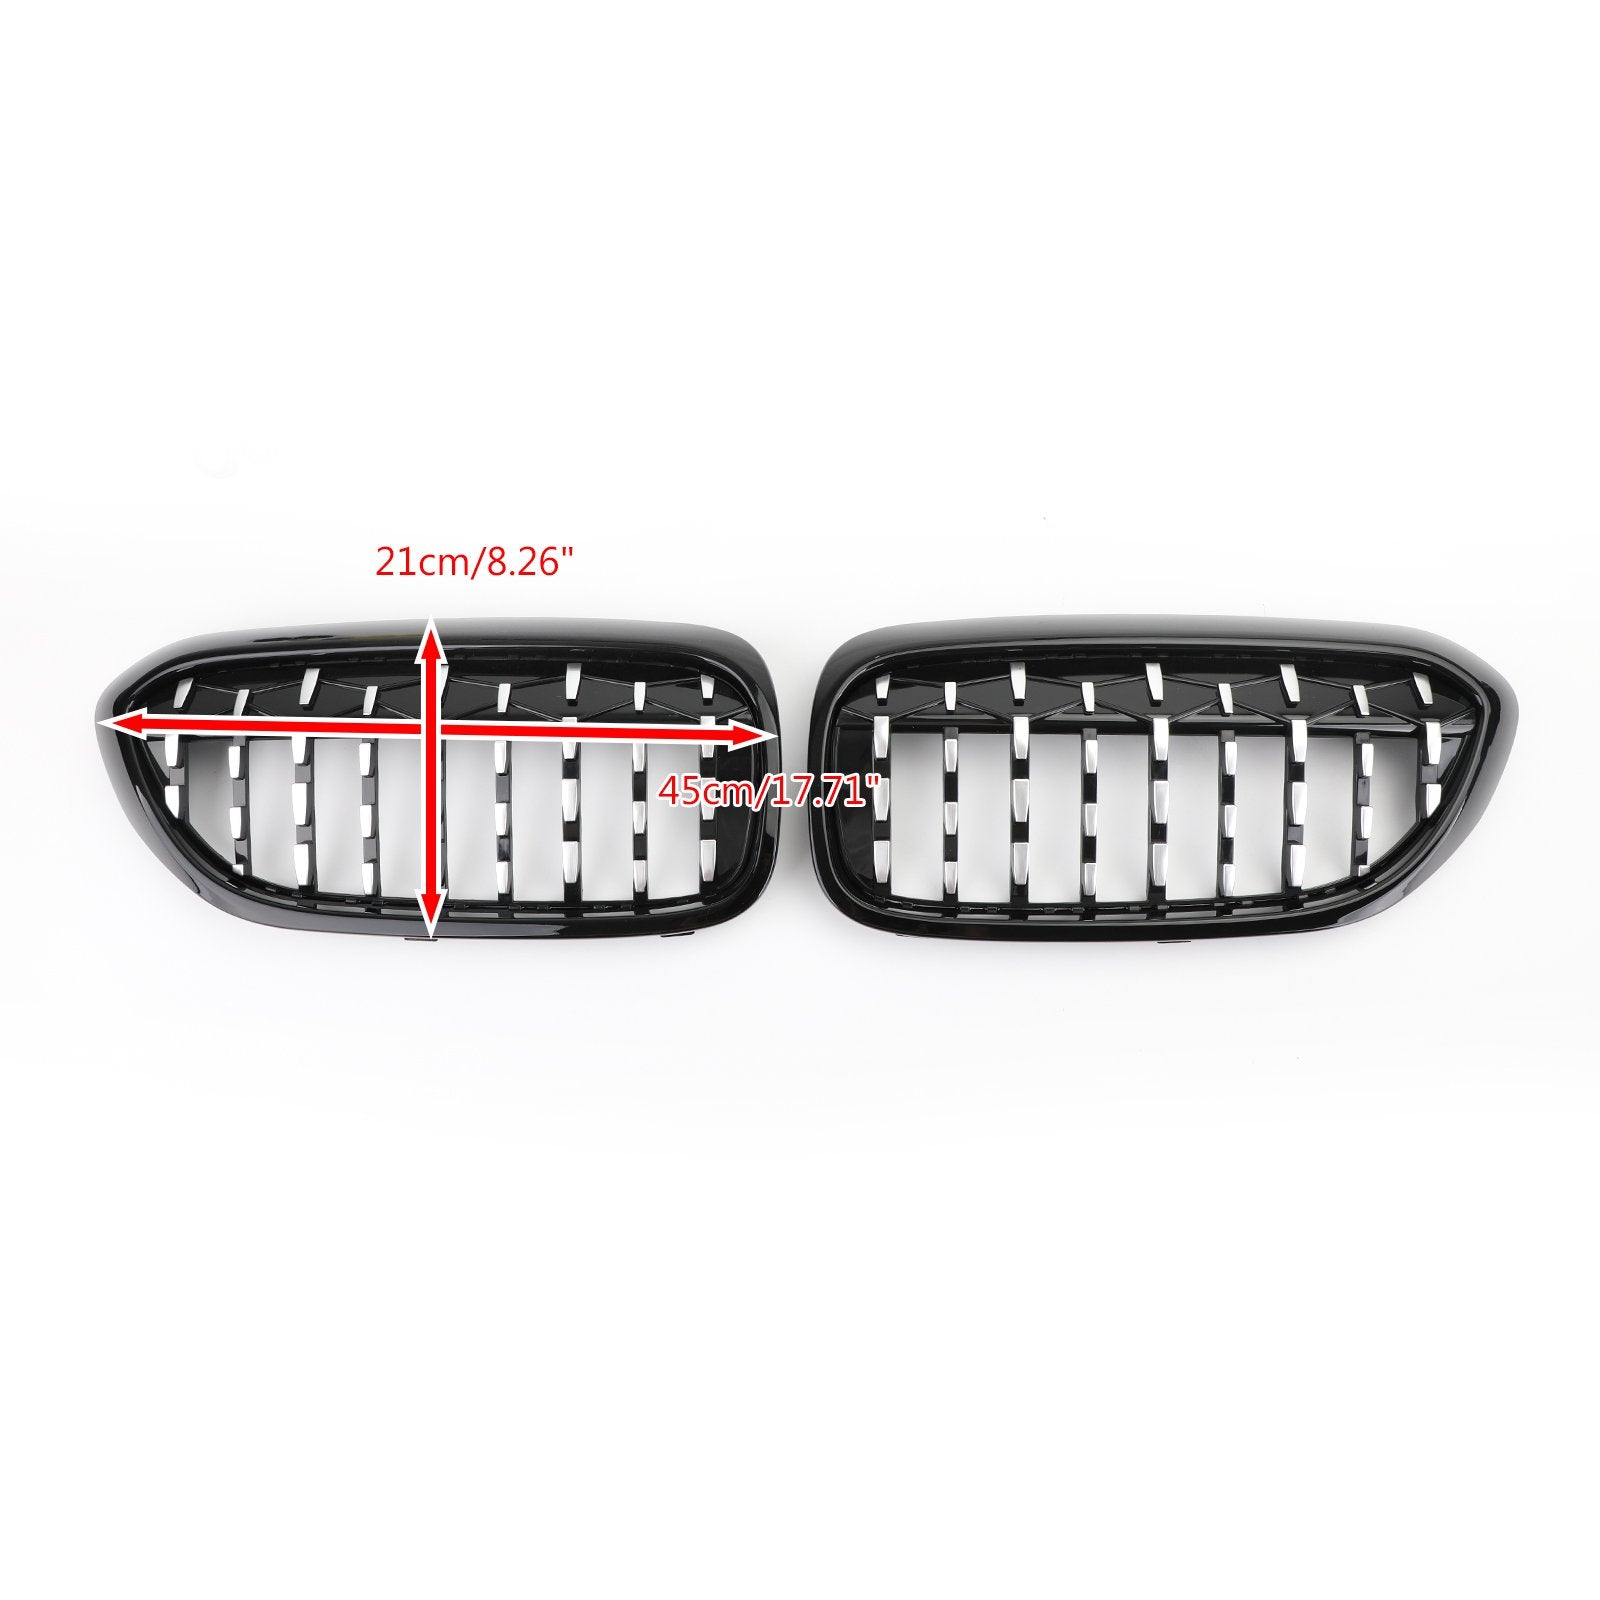 Black & Chrome Diamond Style Front Grill Fit For BMW 5 Series G30 G38 2017-2019 Generic